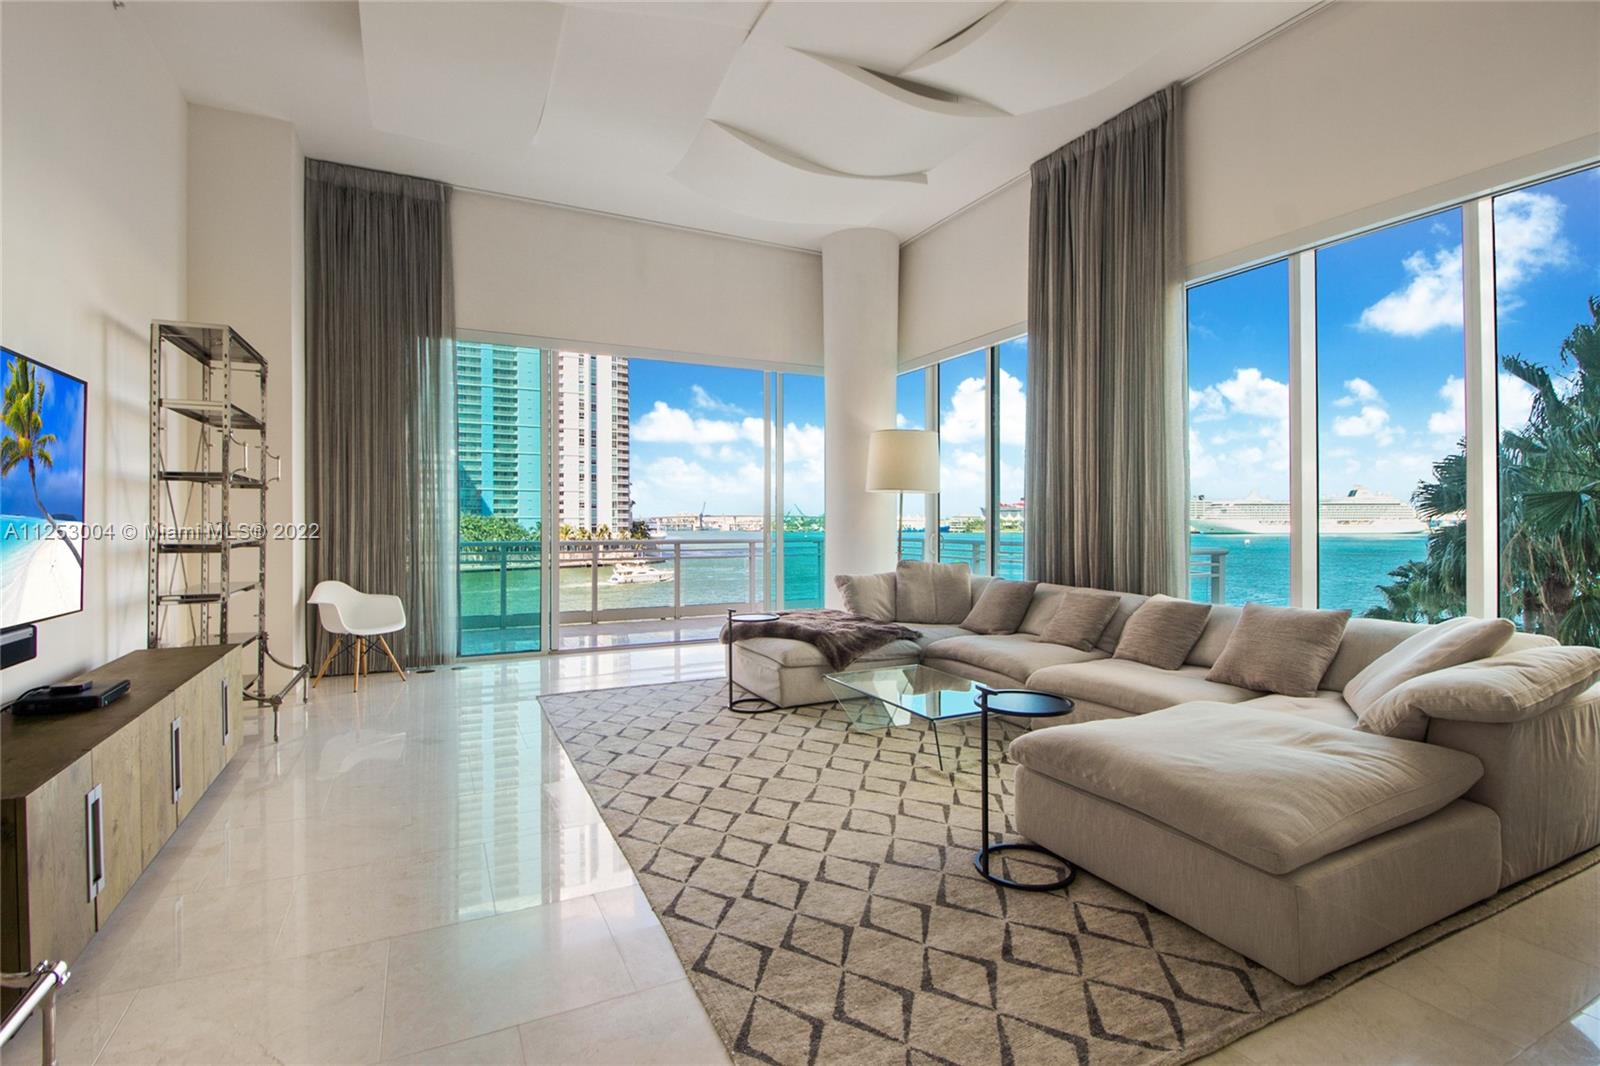 Direct majestic water views with breath-taking sunrises & sunsets await as you enter this oasis. Close to the heart of downtown Brickell. This combined modern corner residence, 4600+SF boasts 4 balconies to enjoy or entertain guests, 5 bd, 4 full baths & 2 ½ baths, high 18 ft ceilings on the main level & 8 parking spaces. The main bedrooms have massive closets. Tons of natural light throughout with many expansive windows. 24-hour guard gate, security & concierge service, private tennis court, indoor basketball & racquetball courts, well equipped fitness center & luxurious pool. Steps from restaurants, shops & nightlife. This is a truly unique unit, one of the largest in Asia. The last large unit to sale in the building was at $1,510/sqft which makes this unit at $1,058/sqft priced to sell!